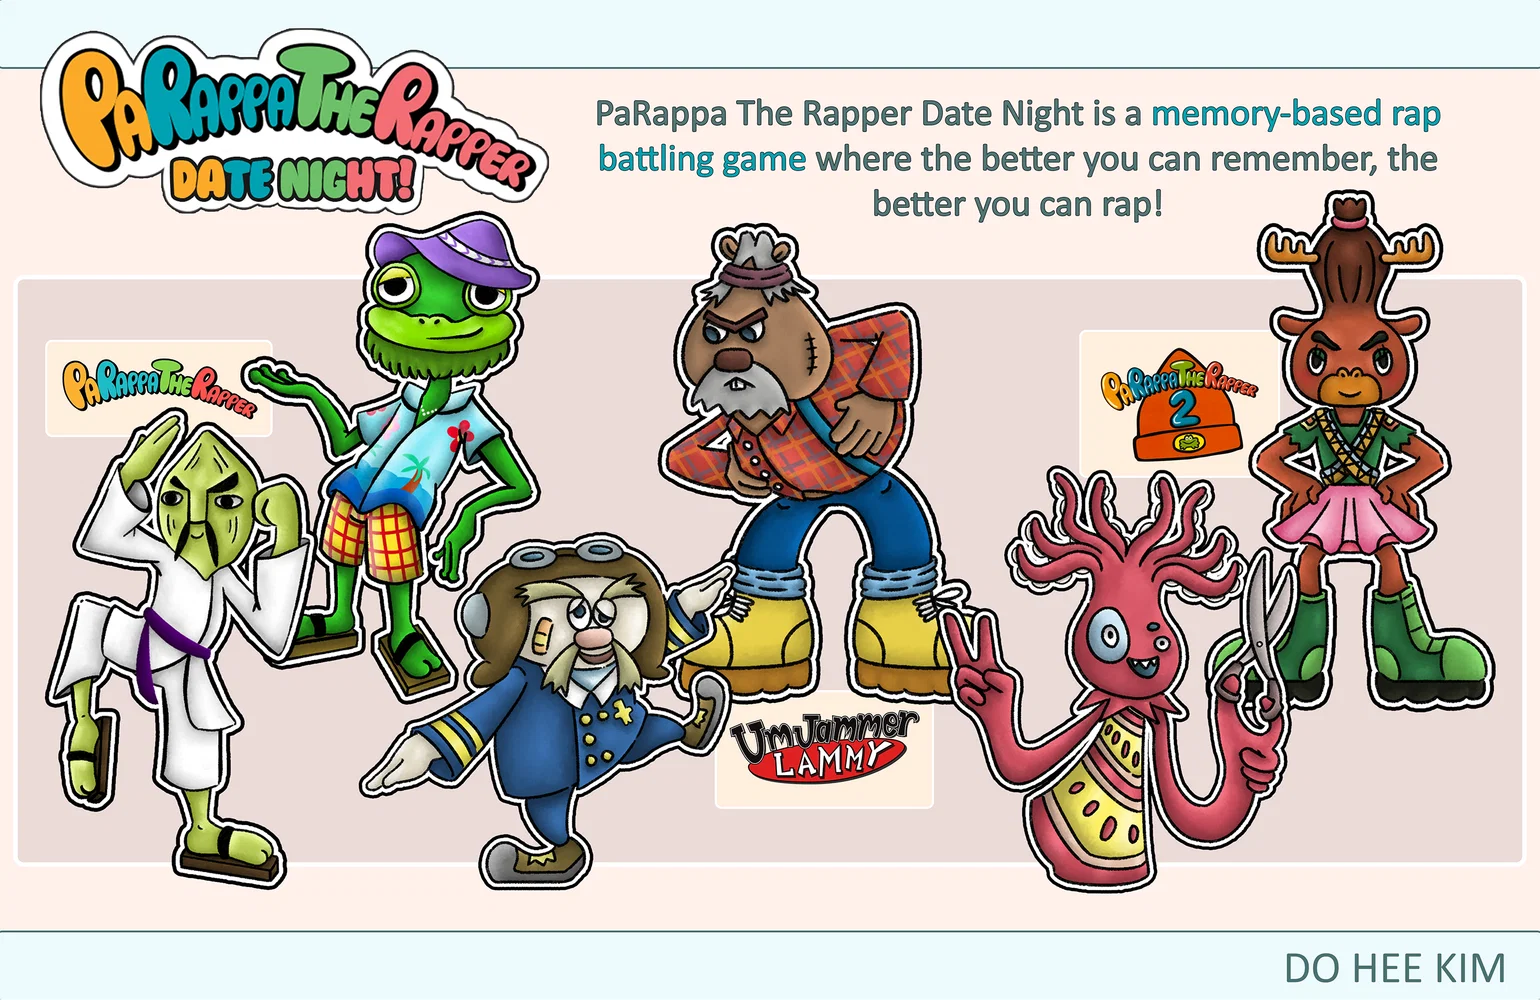 Test your memory in this fast-paced memory rap battling game! Featuring characters from PaRappa The Rapper, PaRappa The Rapper 2, and Um Jammer Lammy!